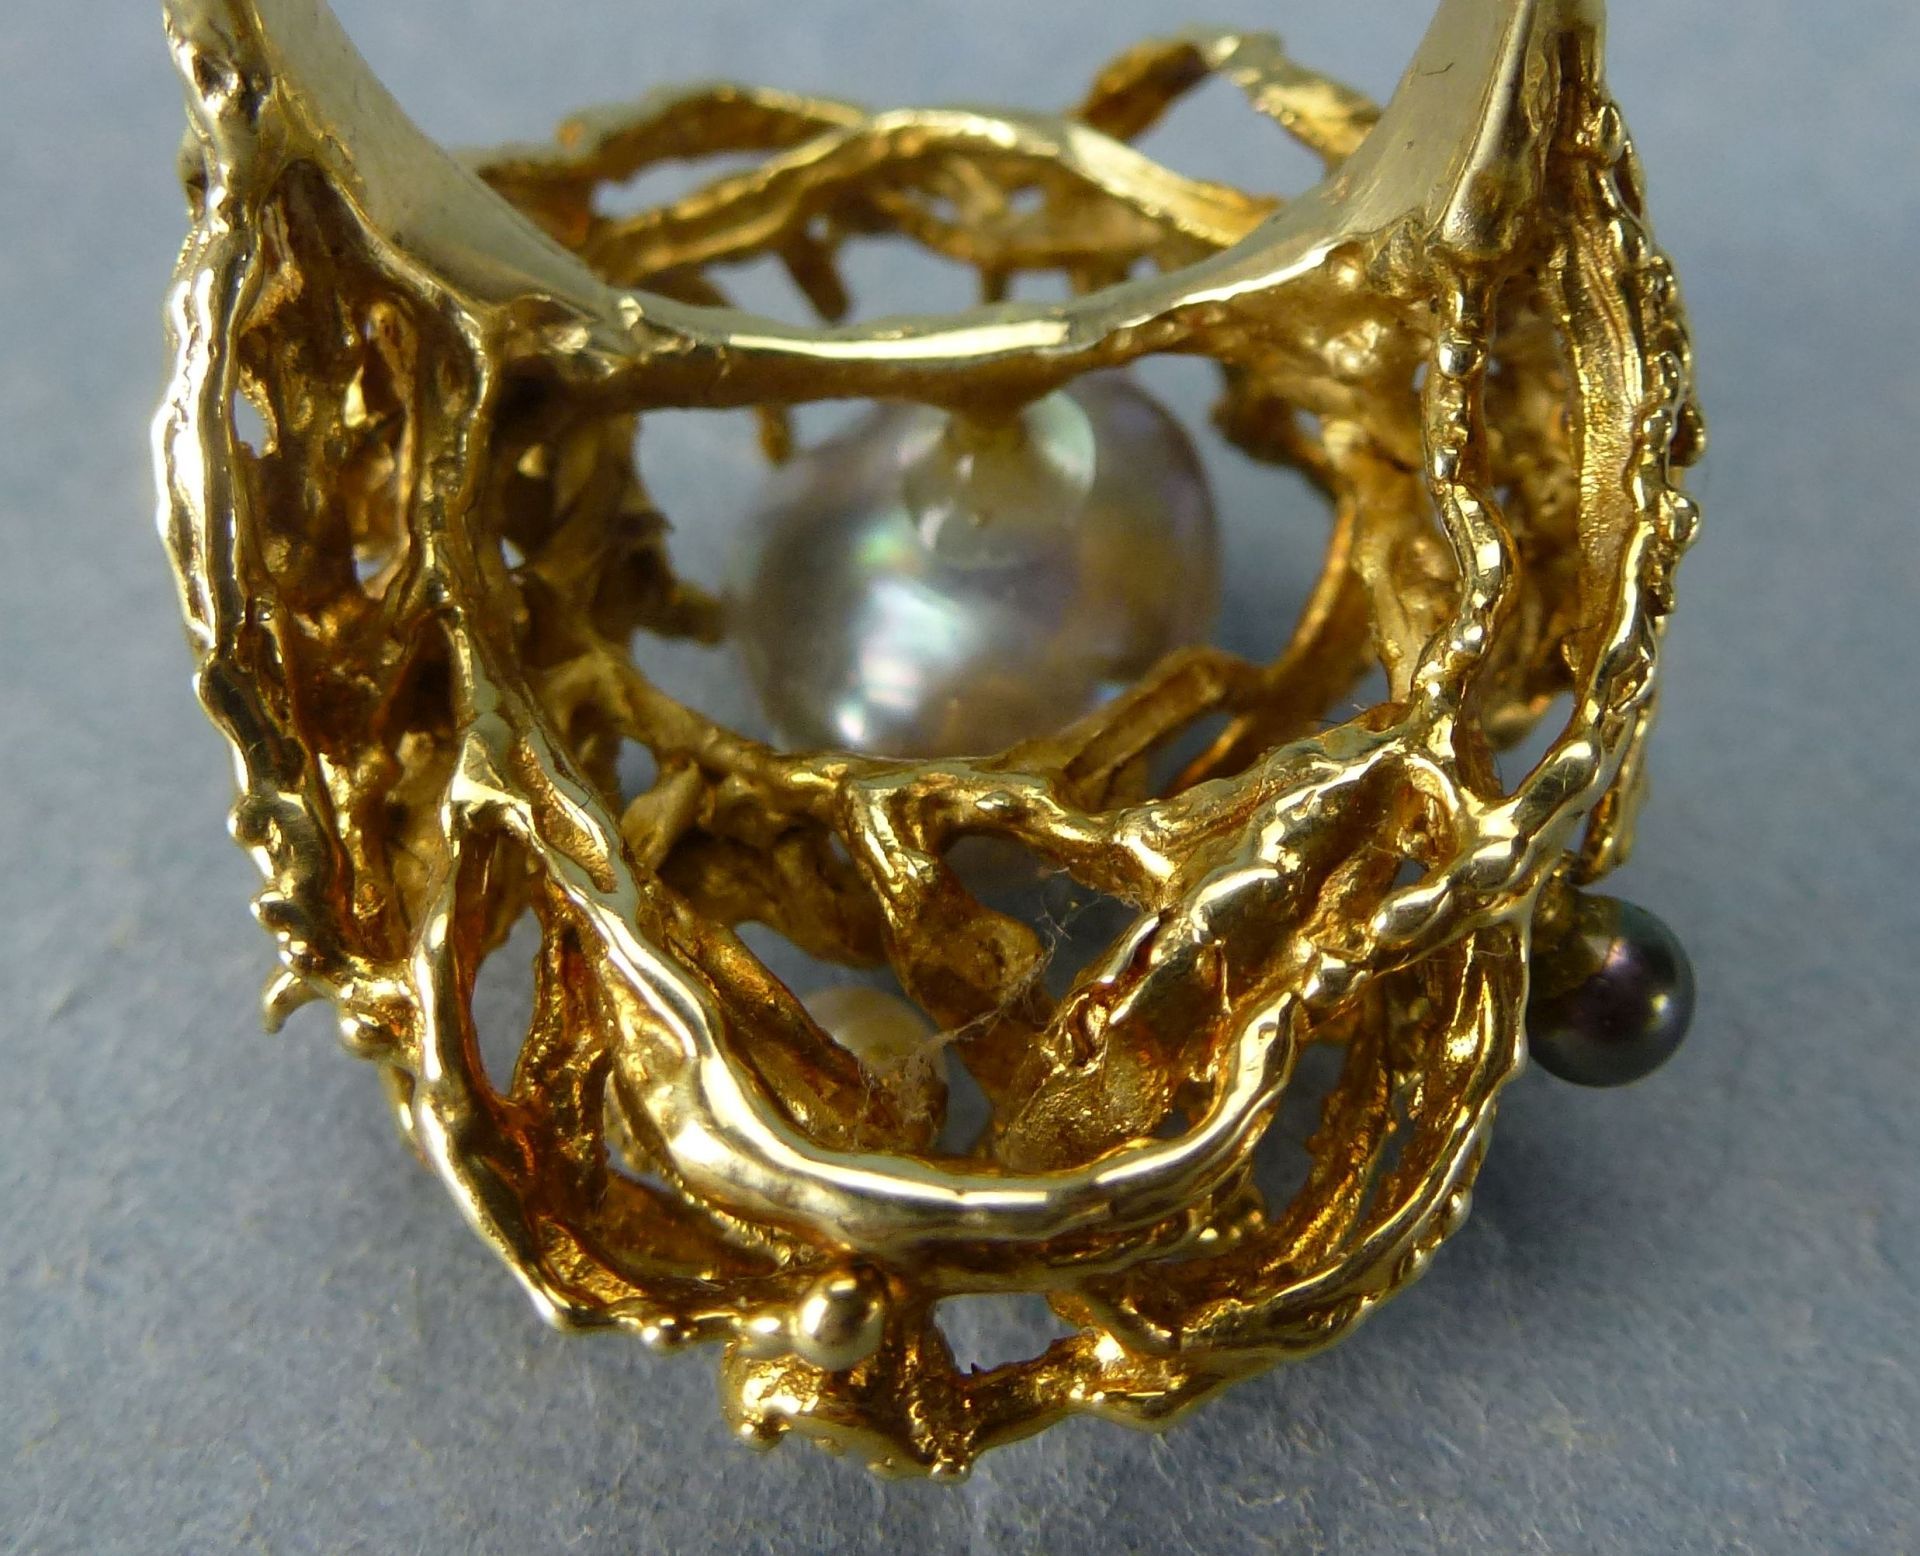 Ring, Lapponia?, 585er Gelbgold - Image 3 of 4